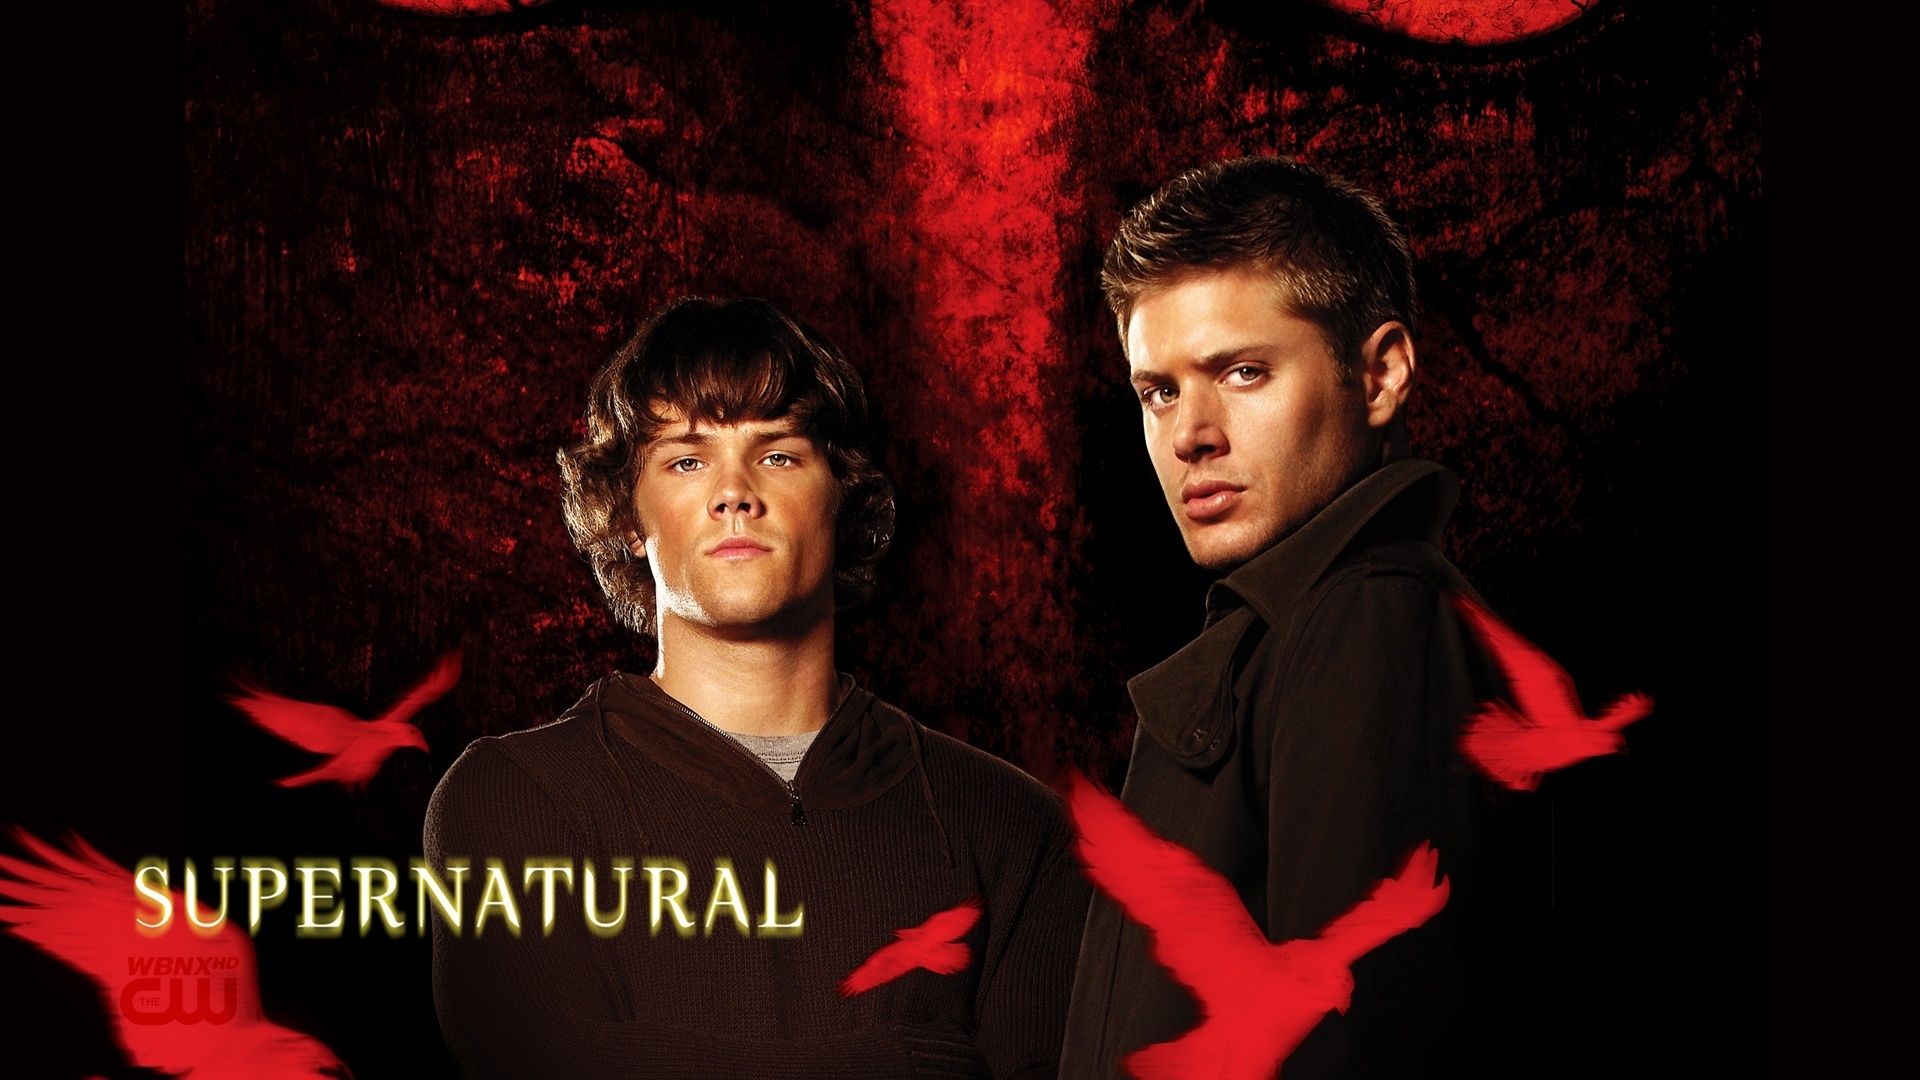 Supernatural Characters for 1920 x 1080 HDTV 1080p resolution